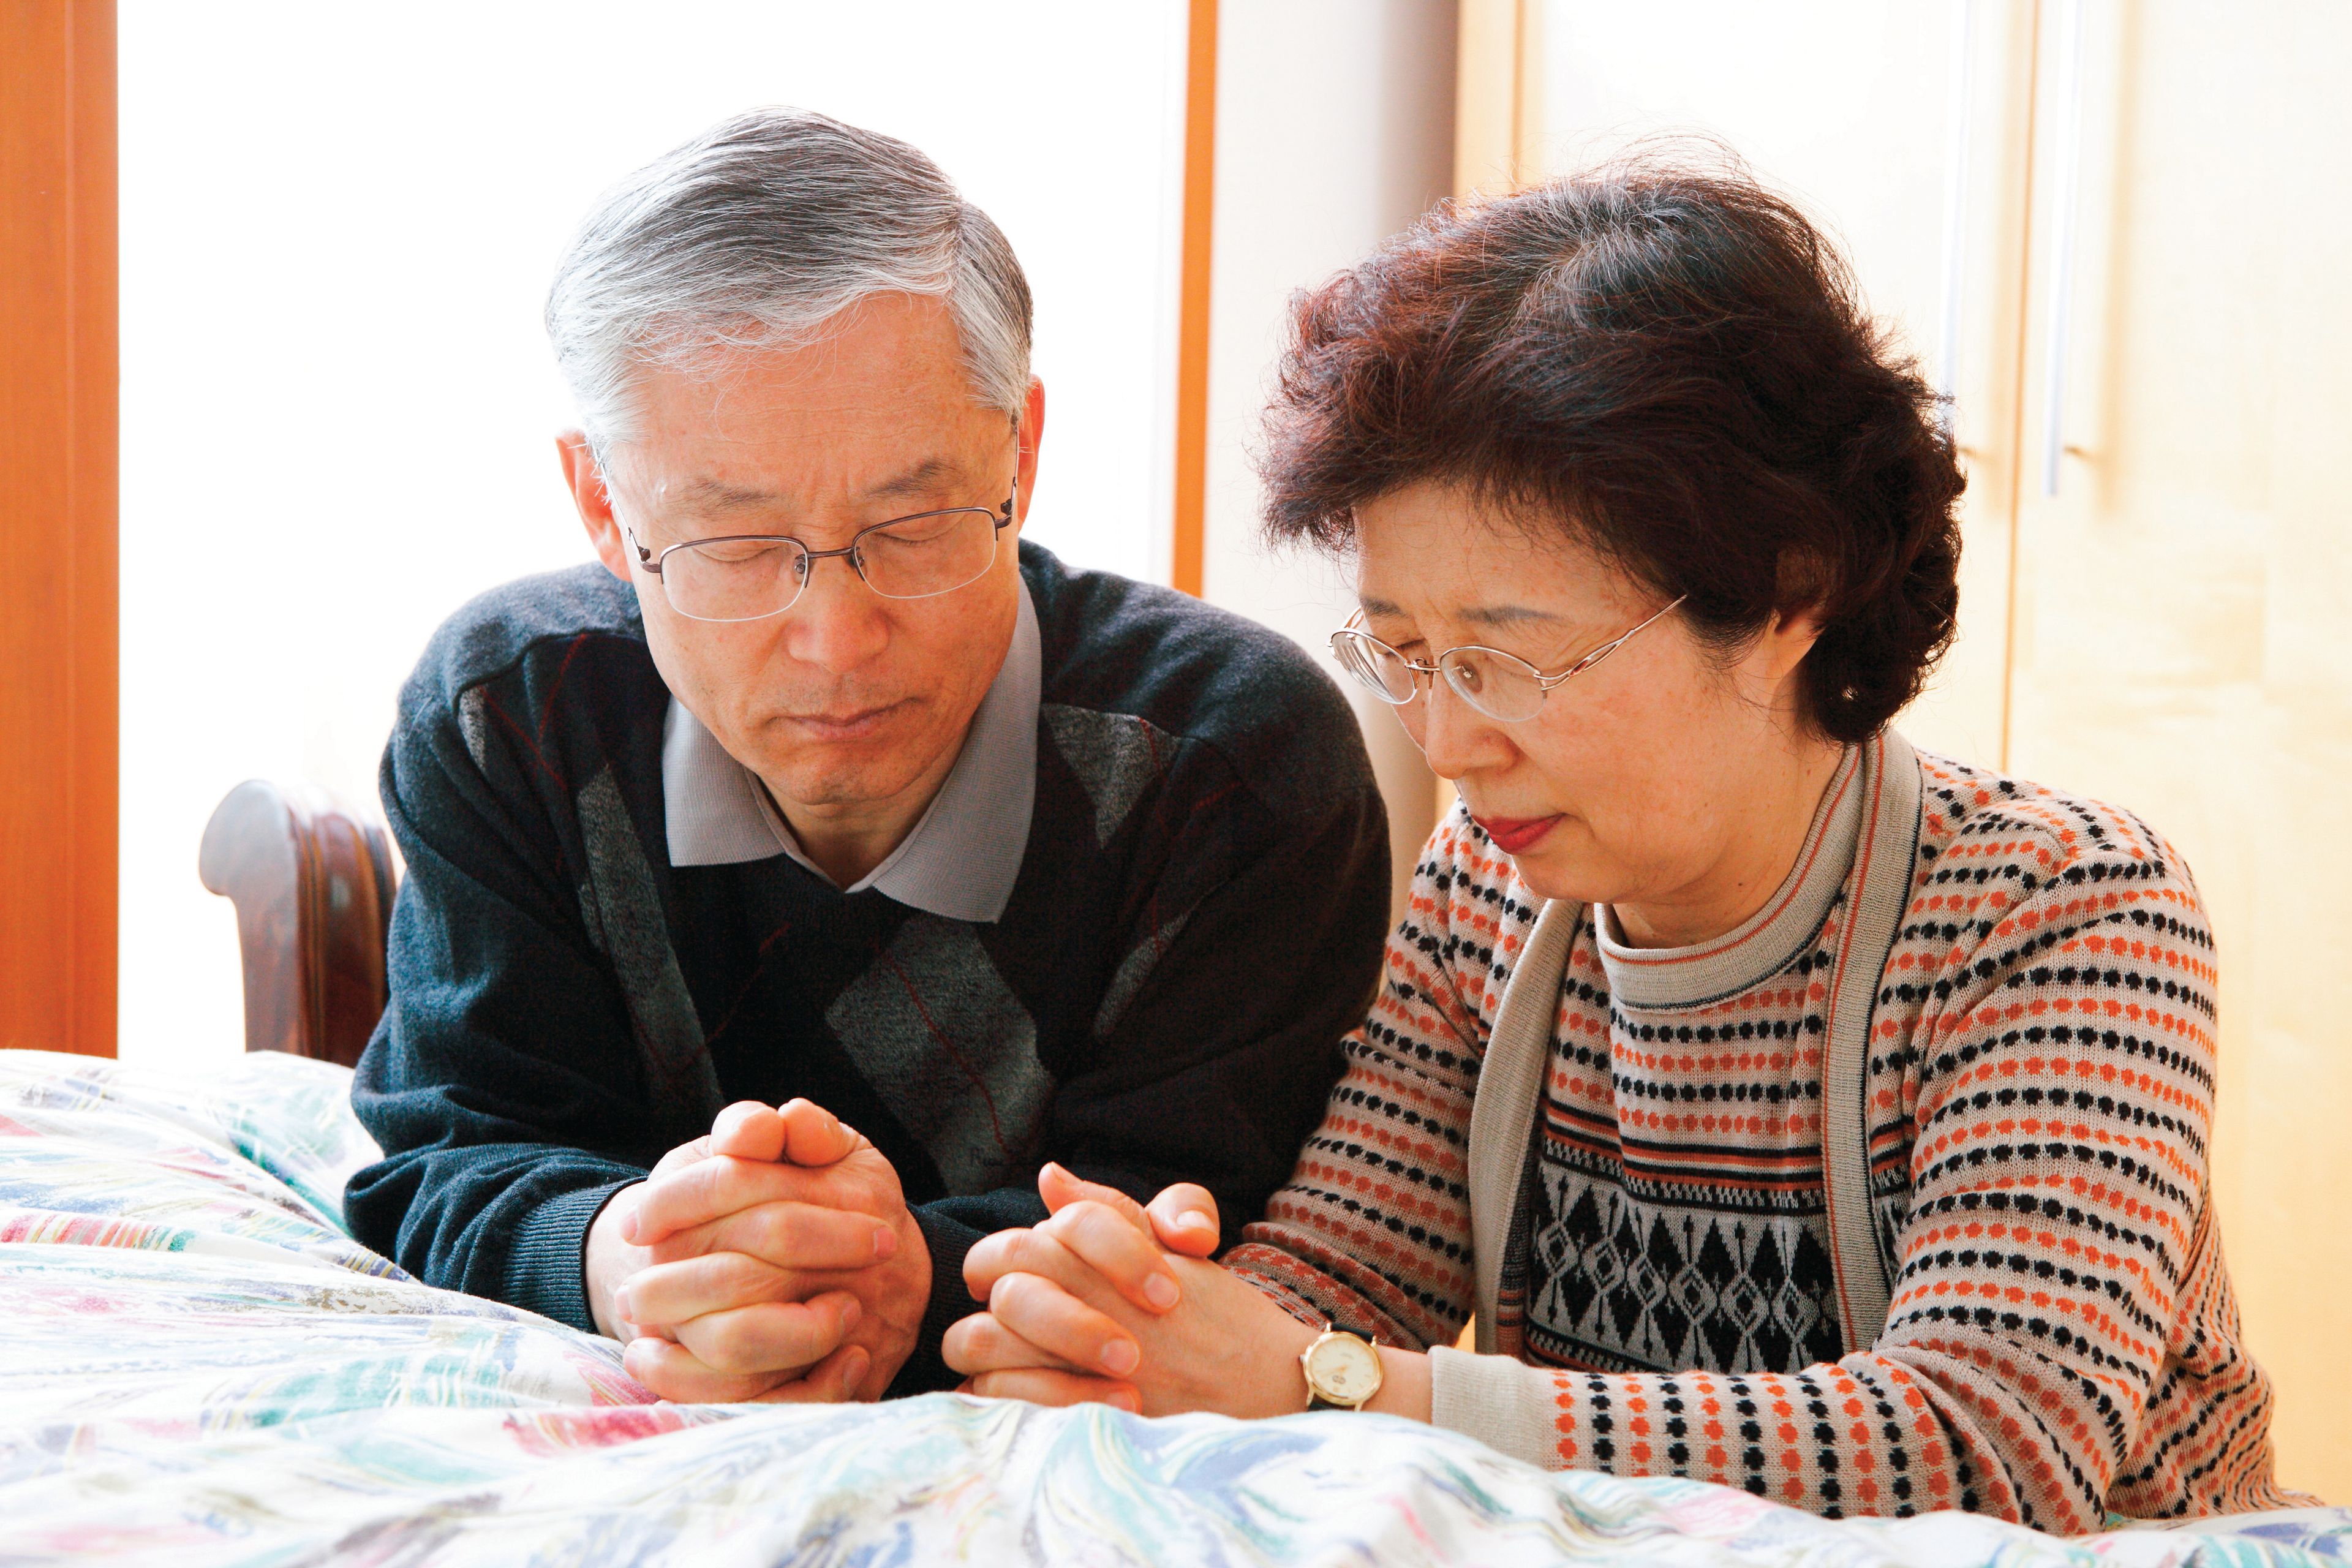 A couple kneeling by their bed to pray together.